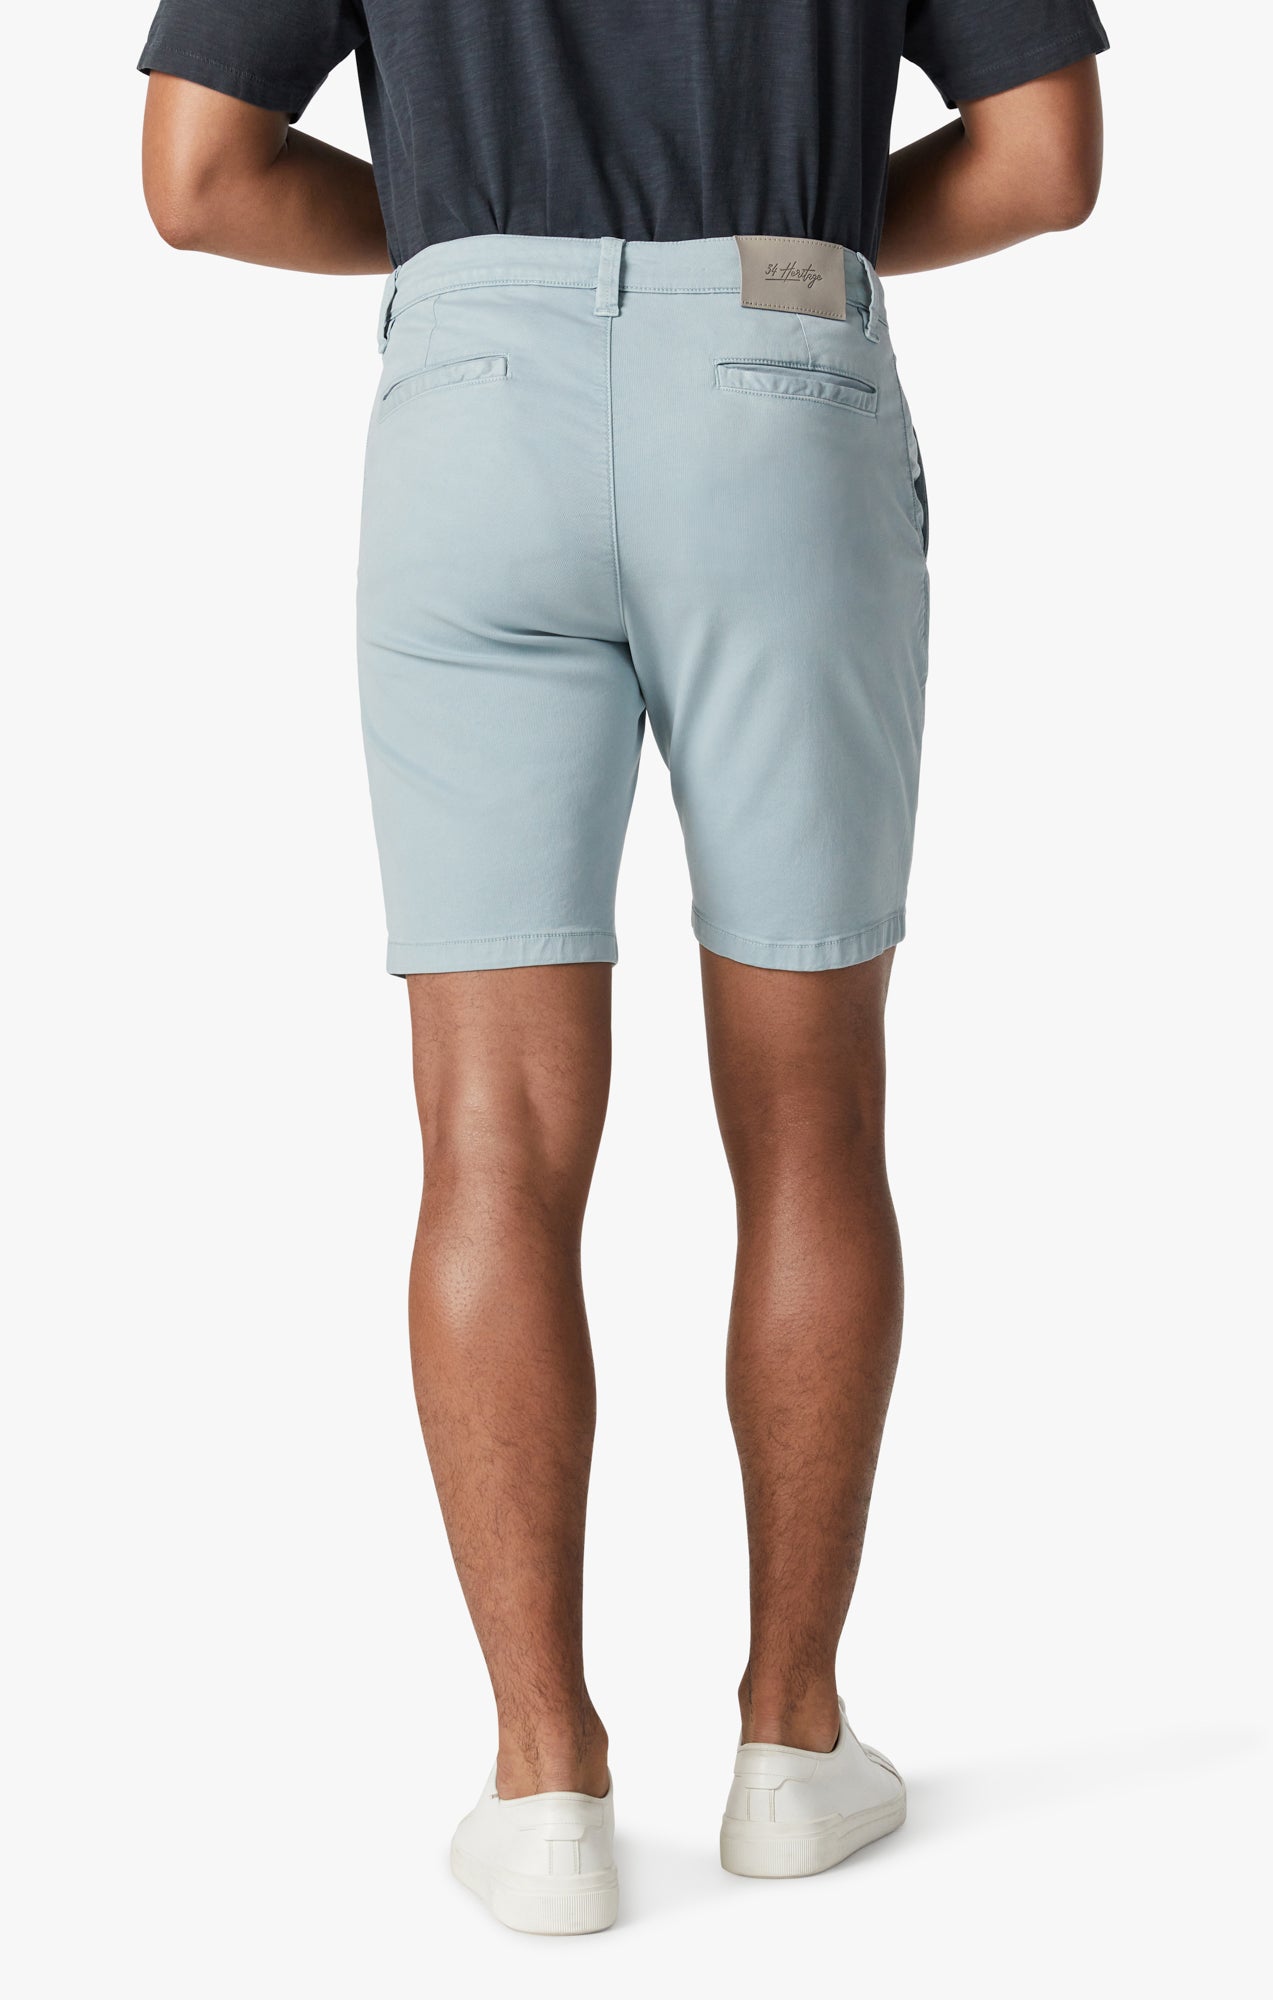 Arizona Shorts In Light Blue Soft Touch Image 4